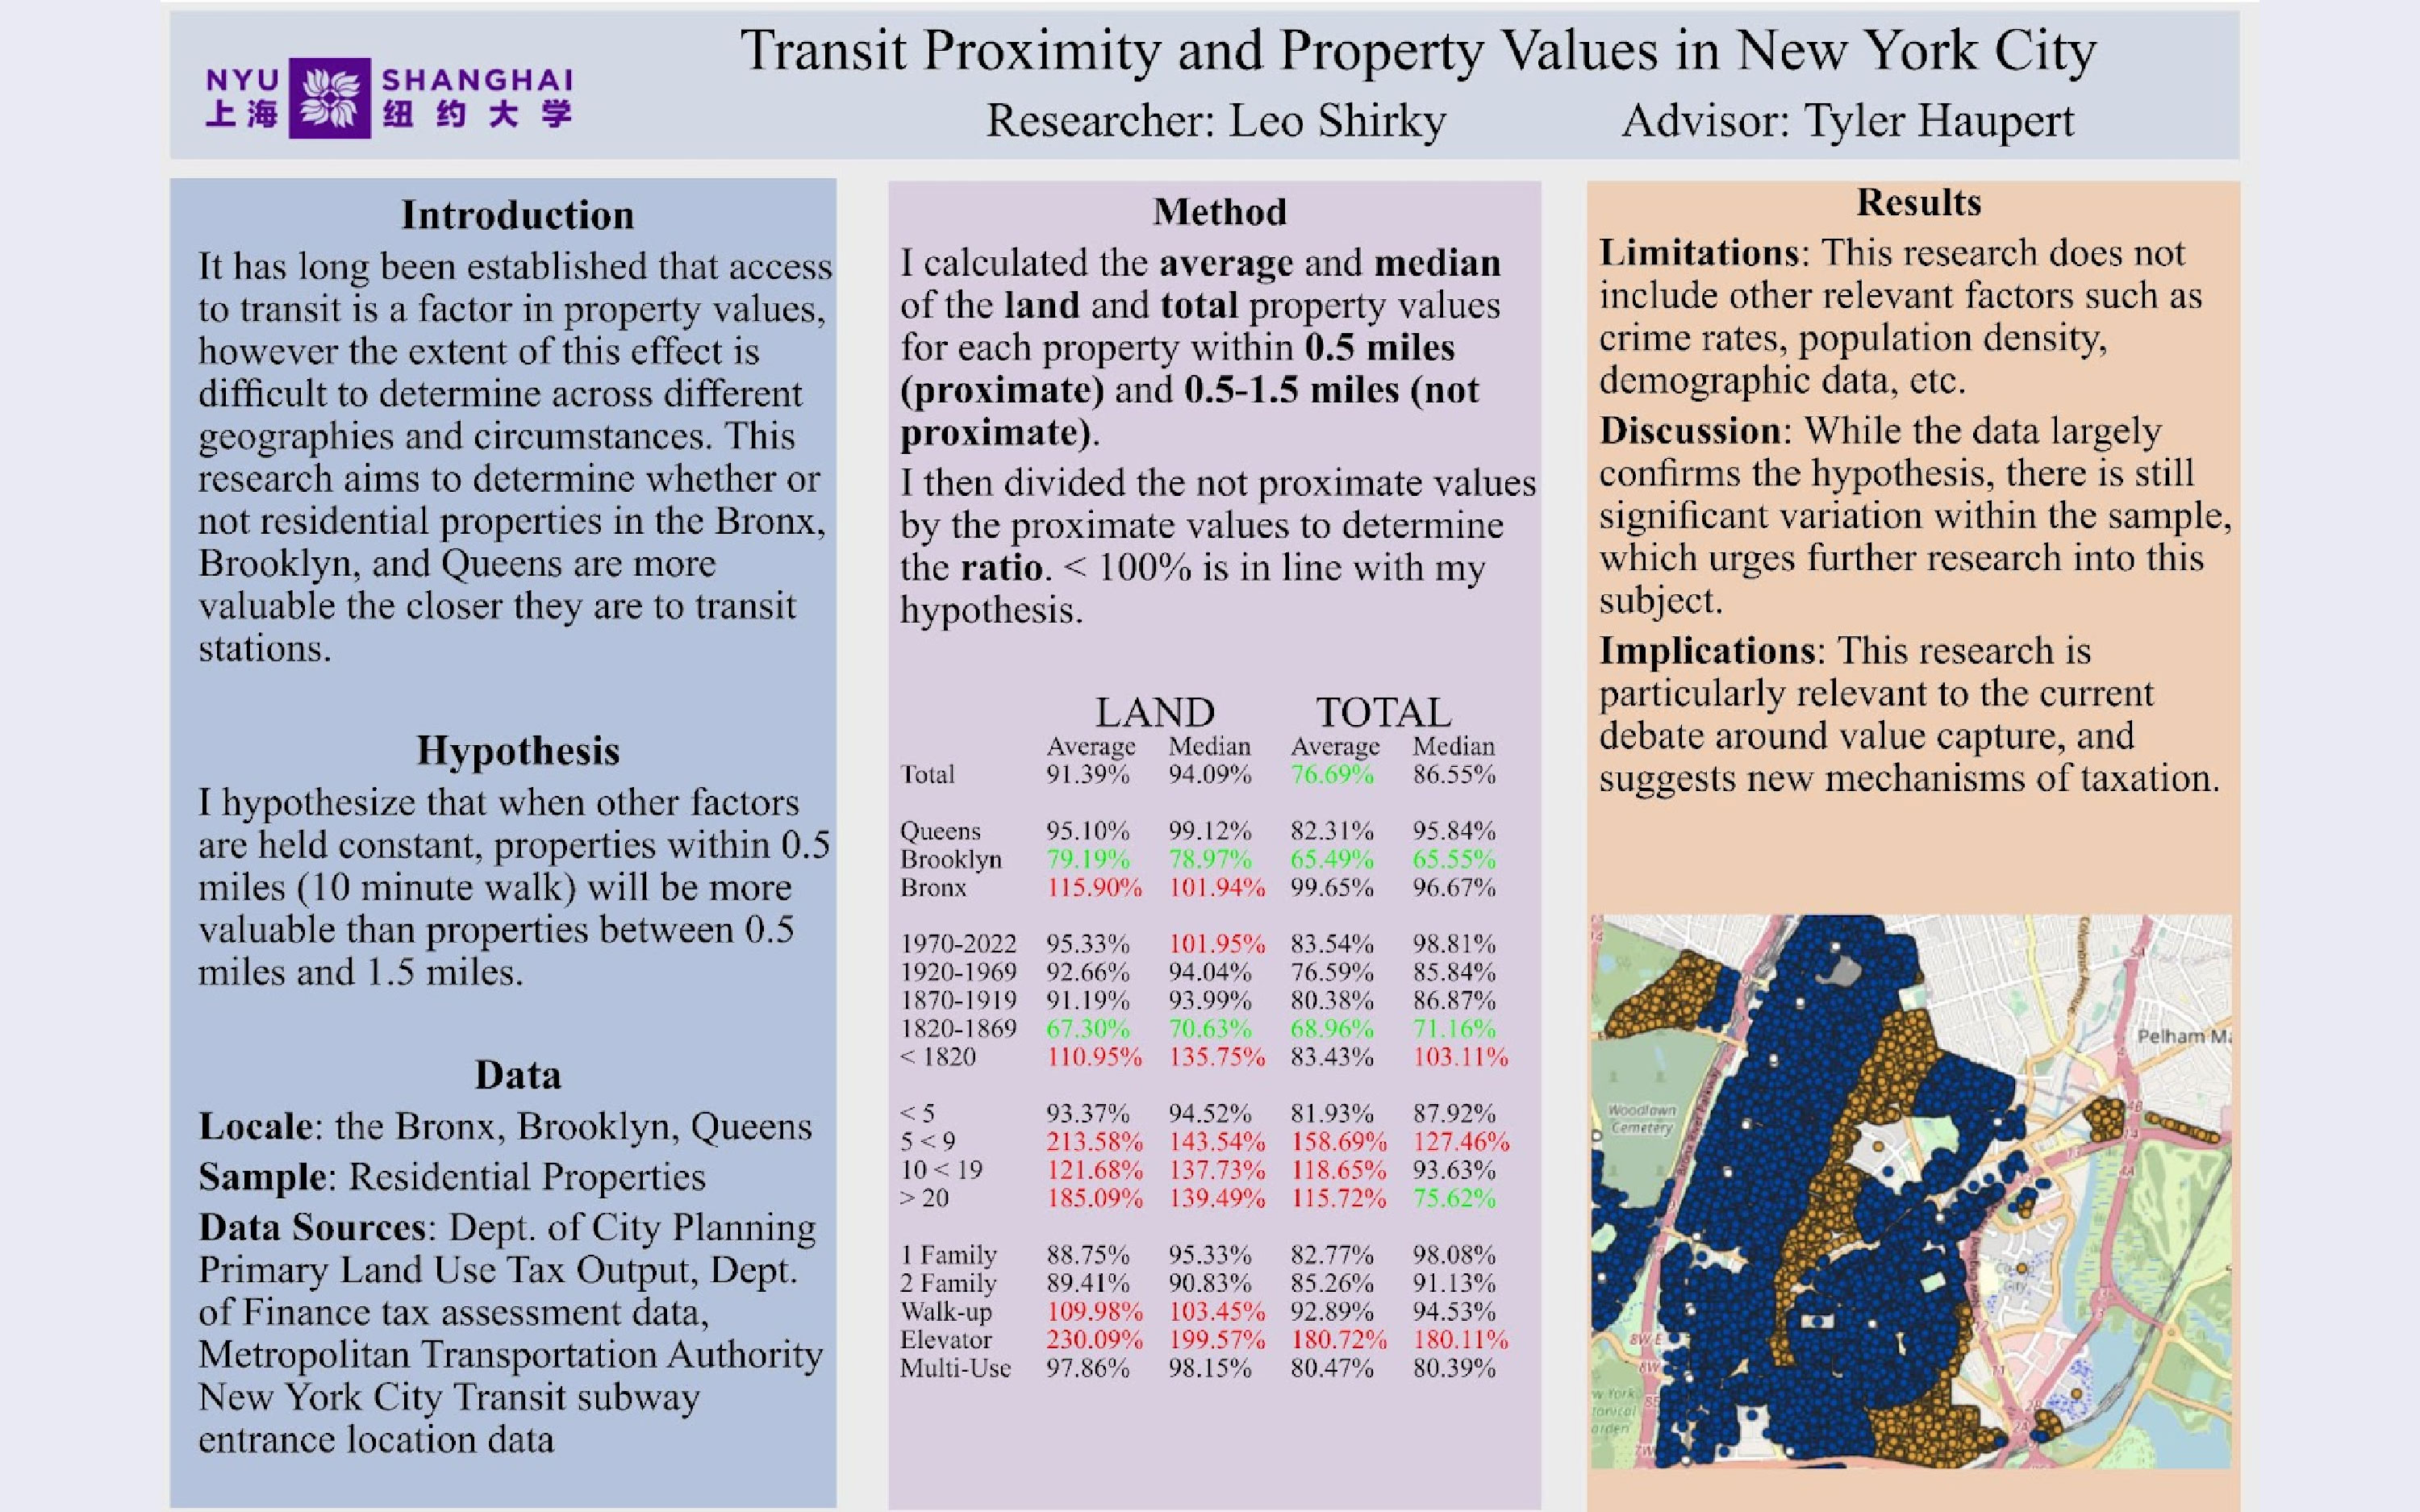 This study will fill in a gap within the existing research on the transit access-property value relationship, specifically with respect to existing, large, high-frequency, high-capacity rapid transit heavy rail systems in large American metro areas.